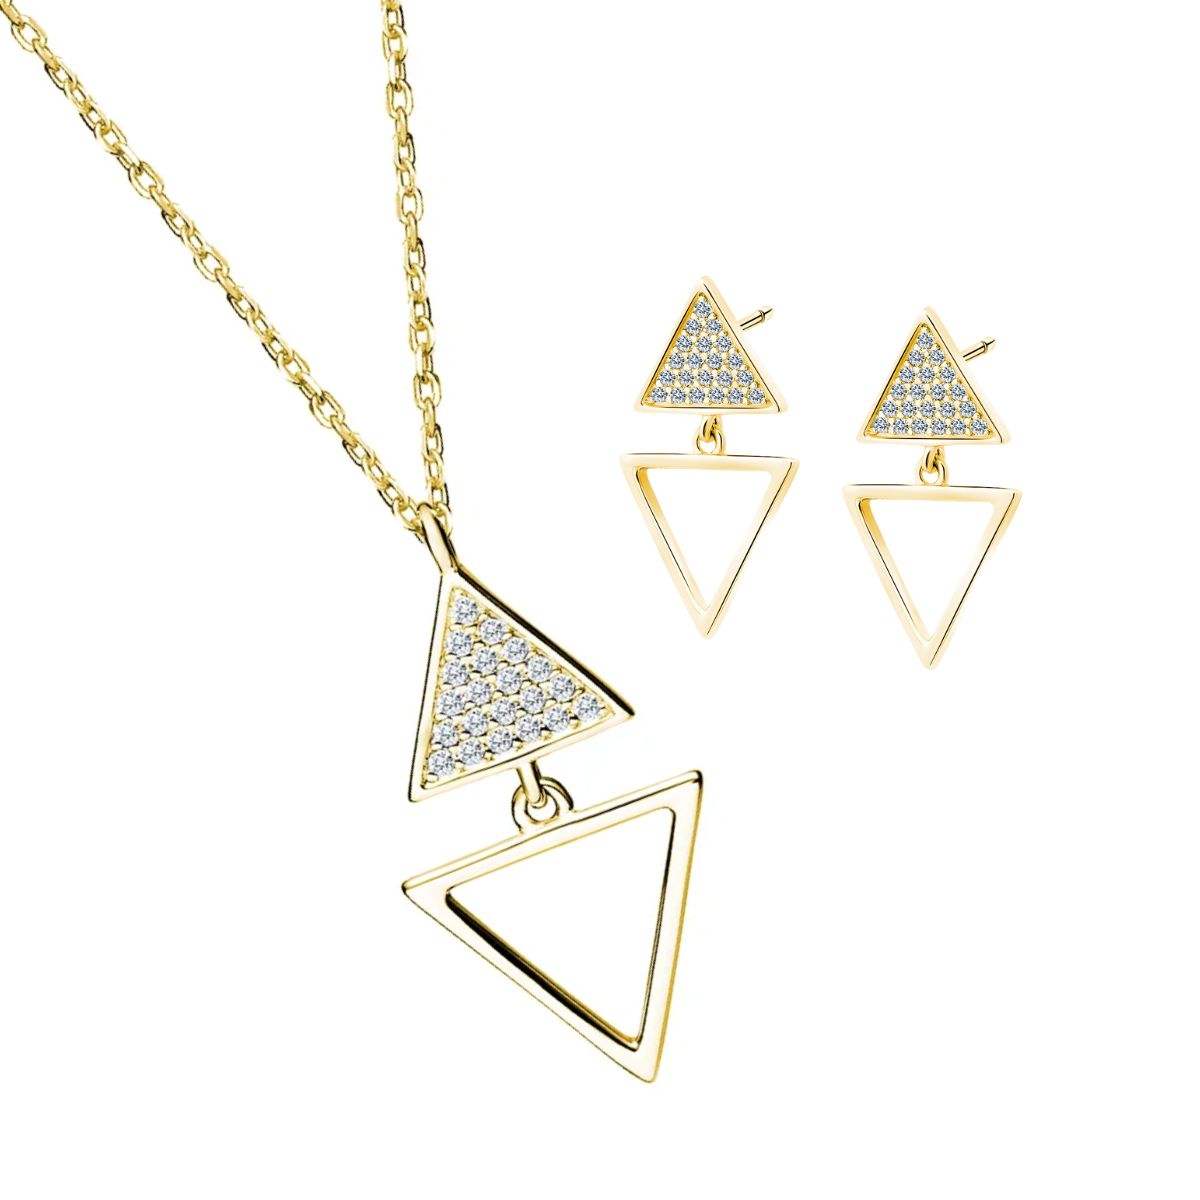 triangles rule necklace and stud earrings Triangles Rule Necklace and Stud Earrings Gift Set – Gold Plated - ασήμι 925